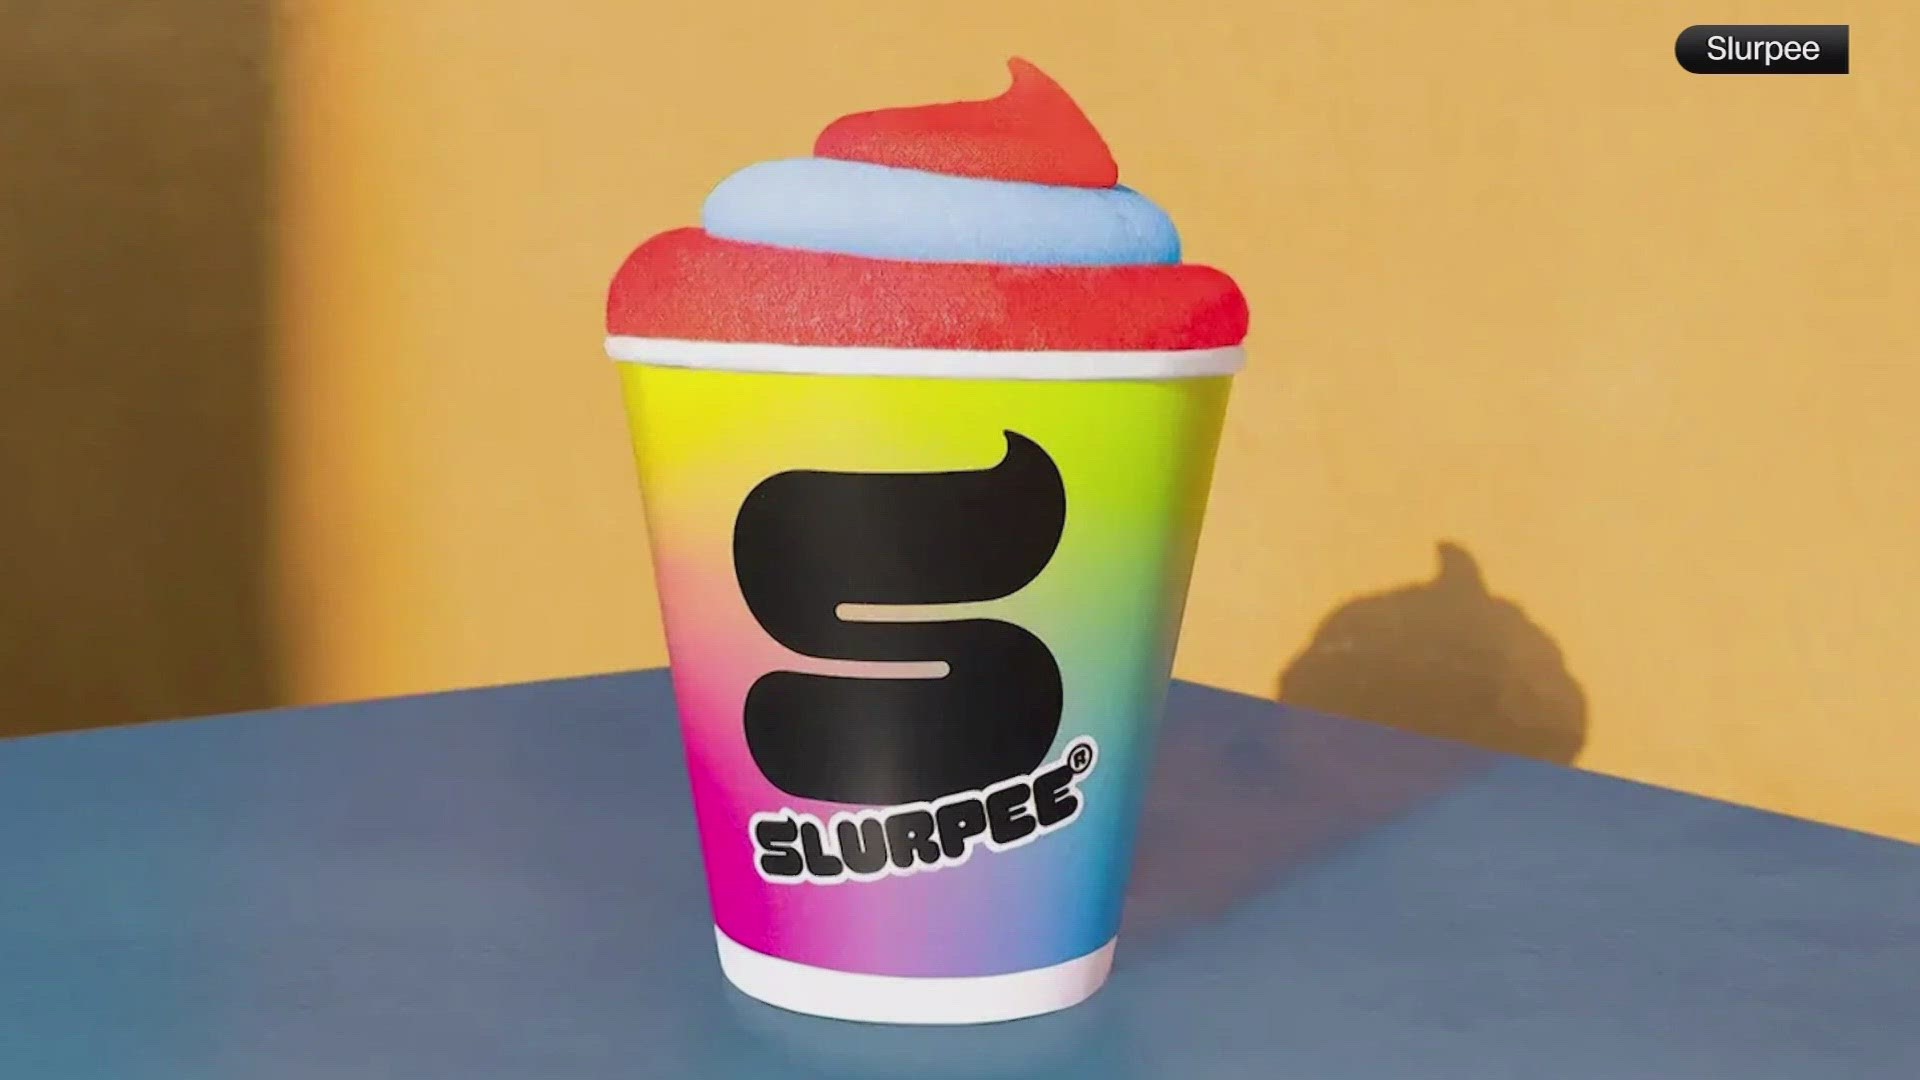 Help them celebrate with a FREE small Slurpee!